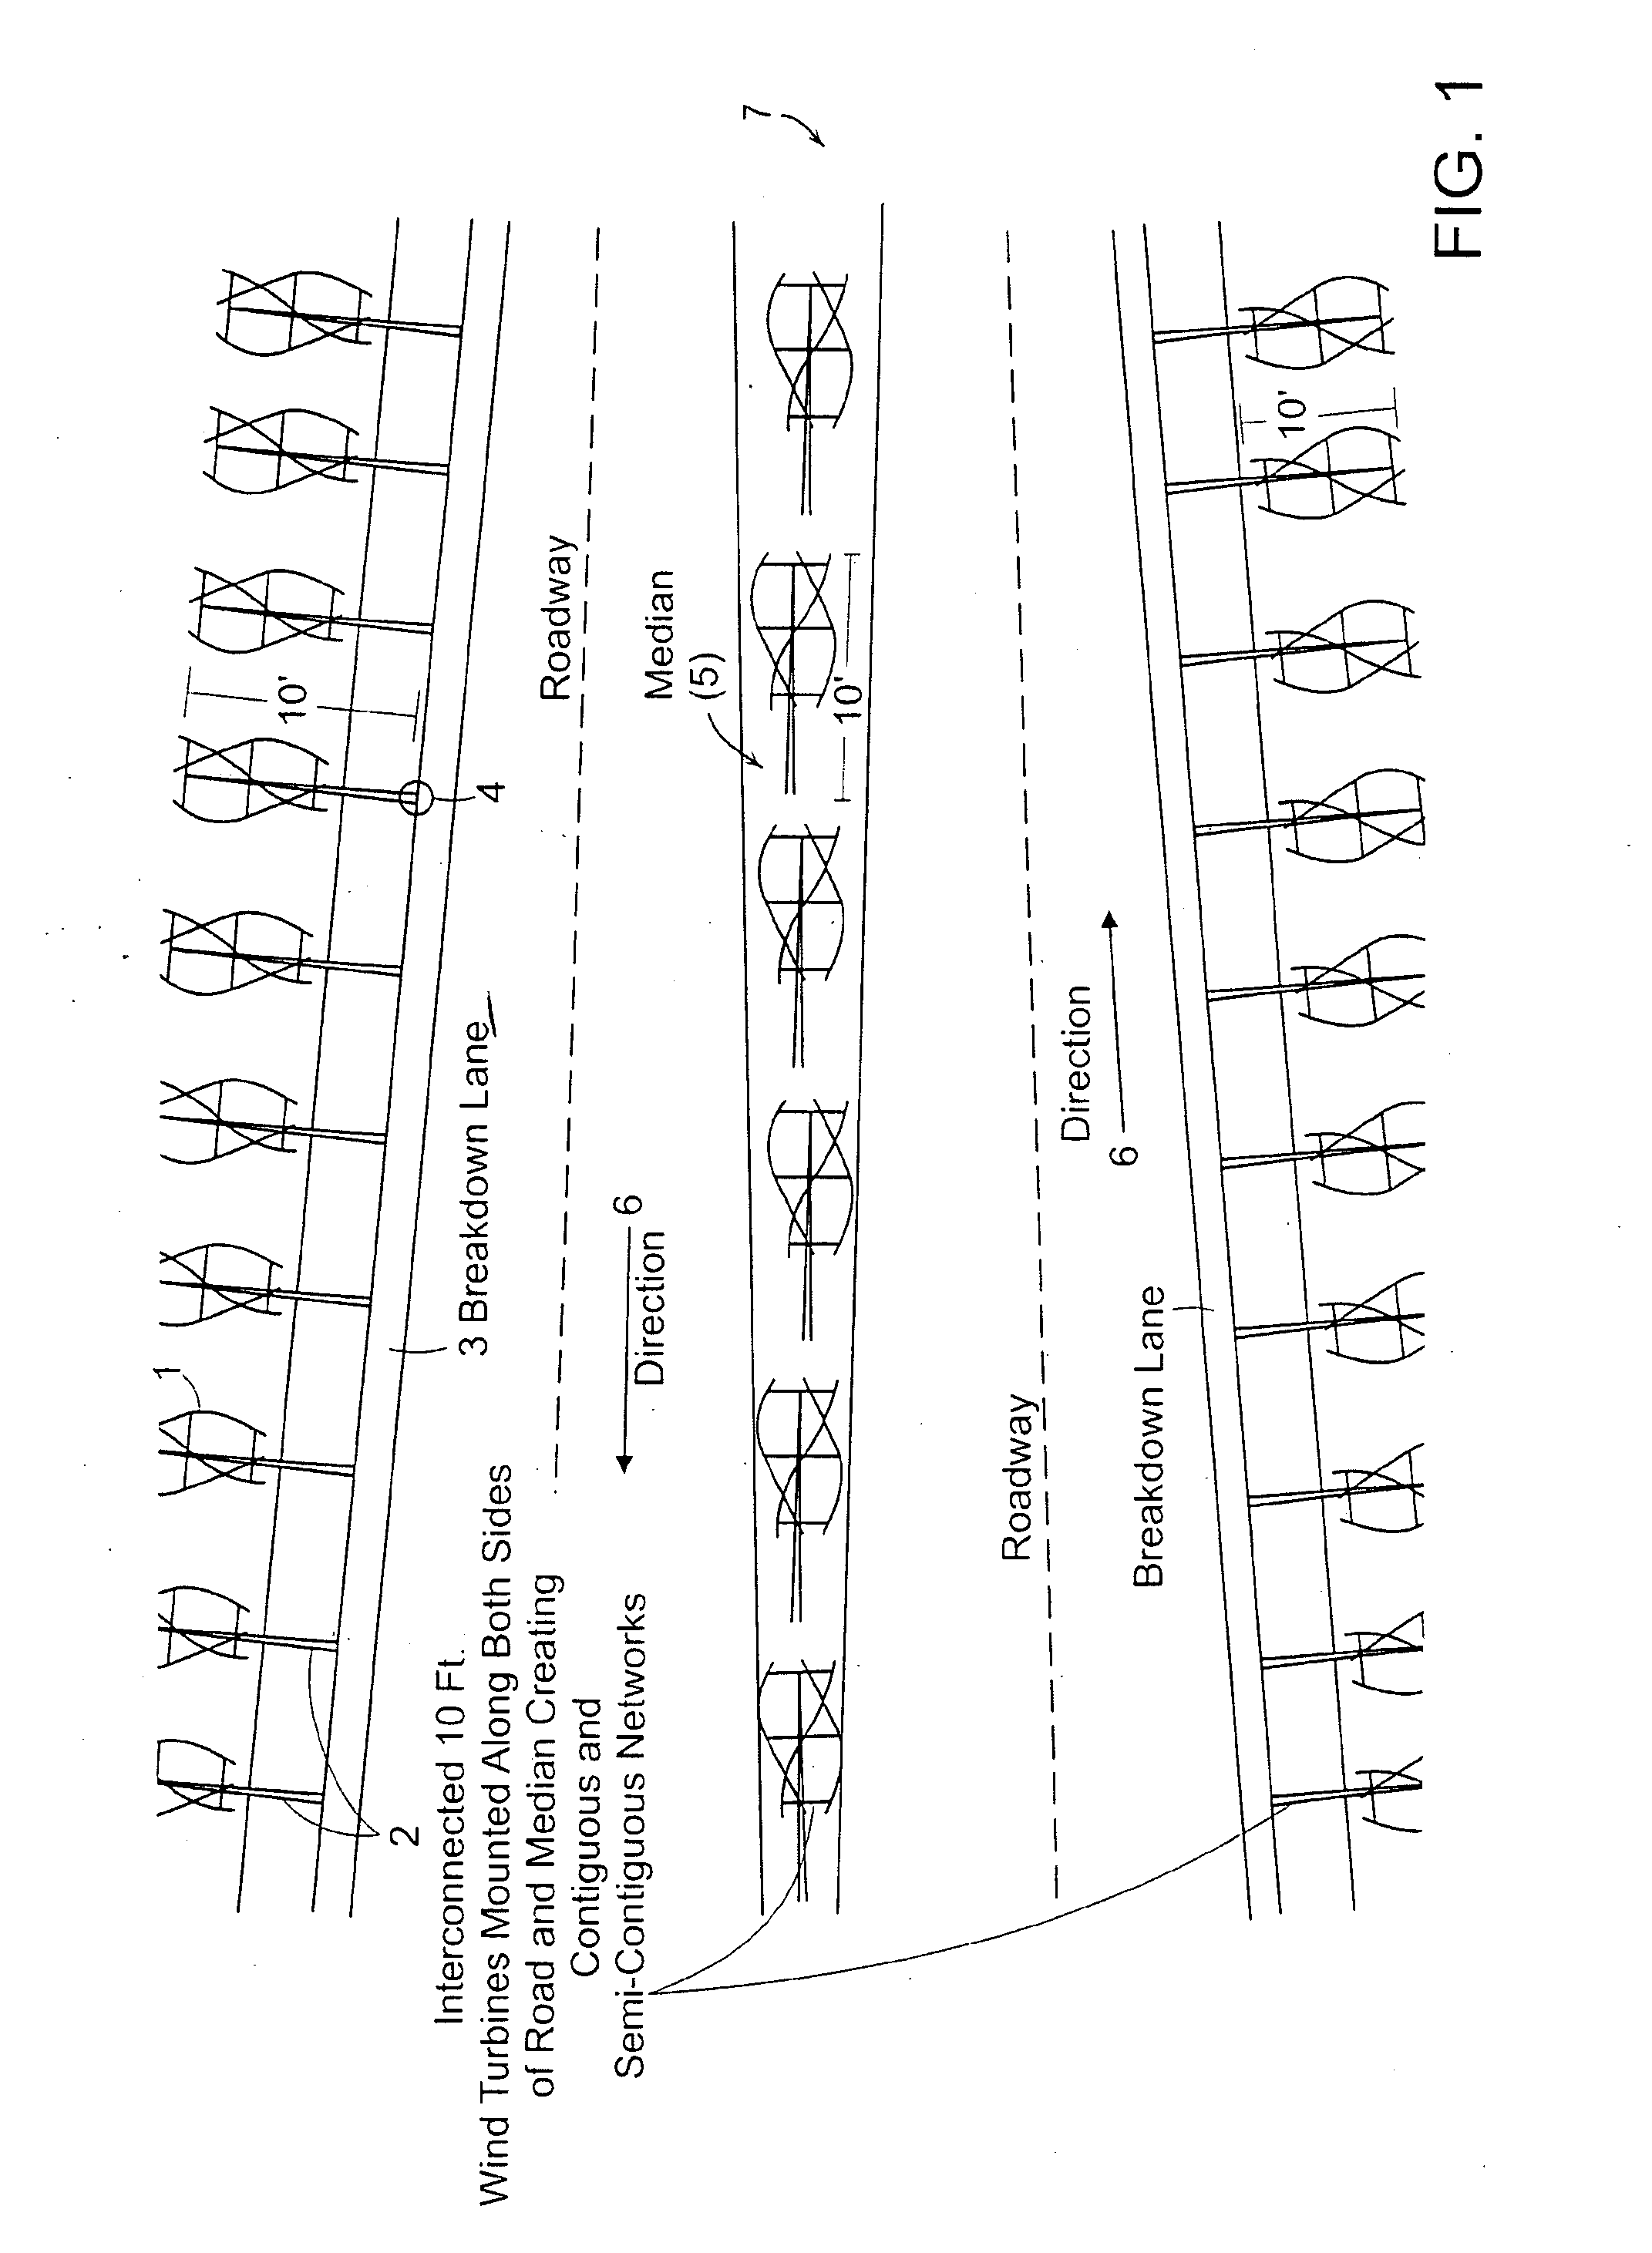 System and Method for Creating a Networked Infrastructure Distribution Platform of Small Wind Energy Gathering Devices